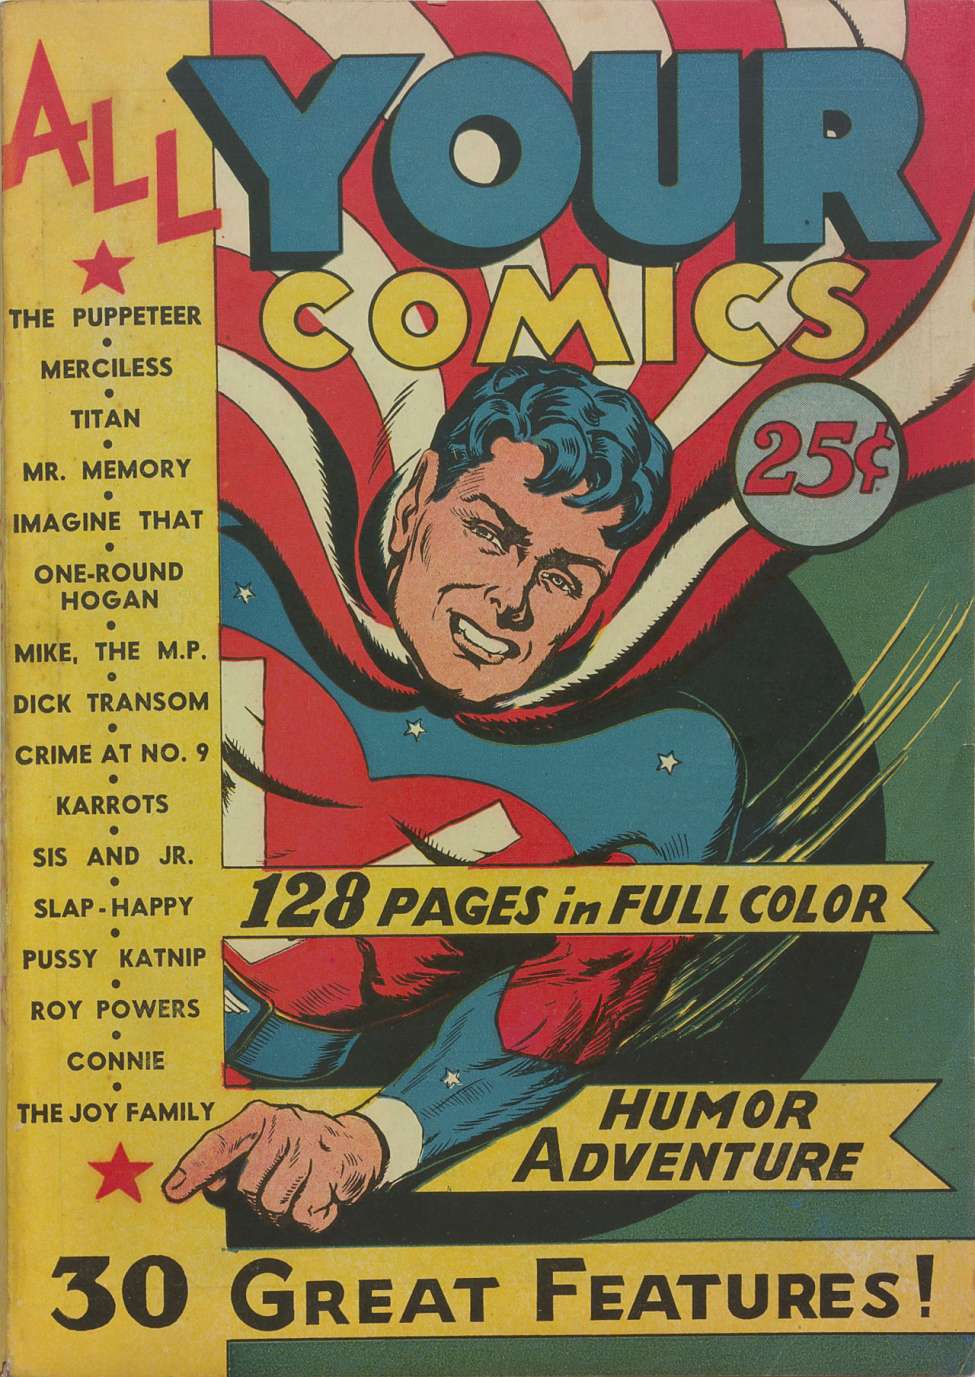 Comic Book Cover For All Your Comics